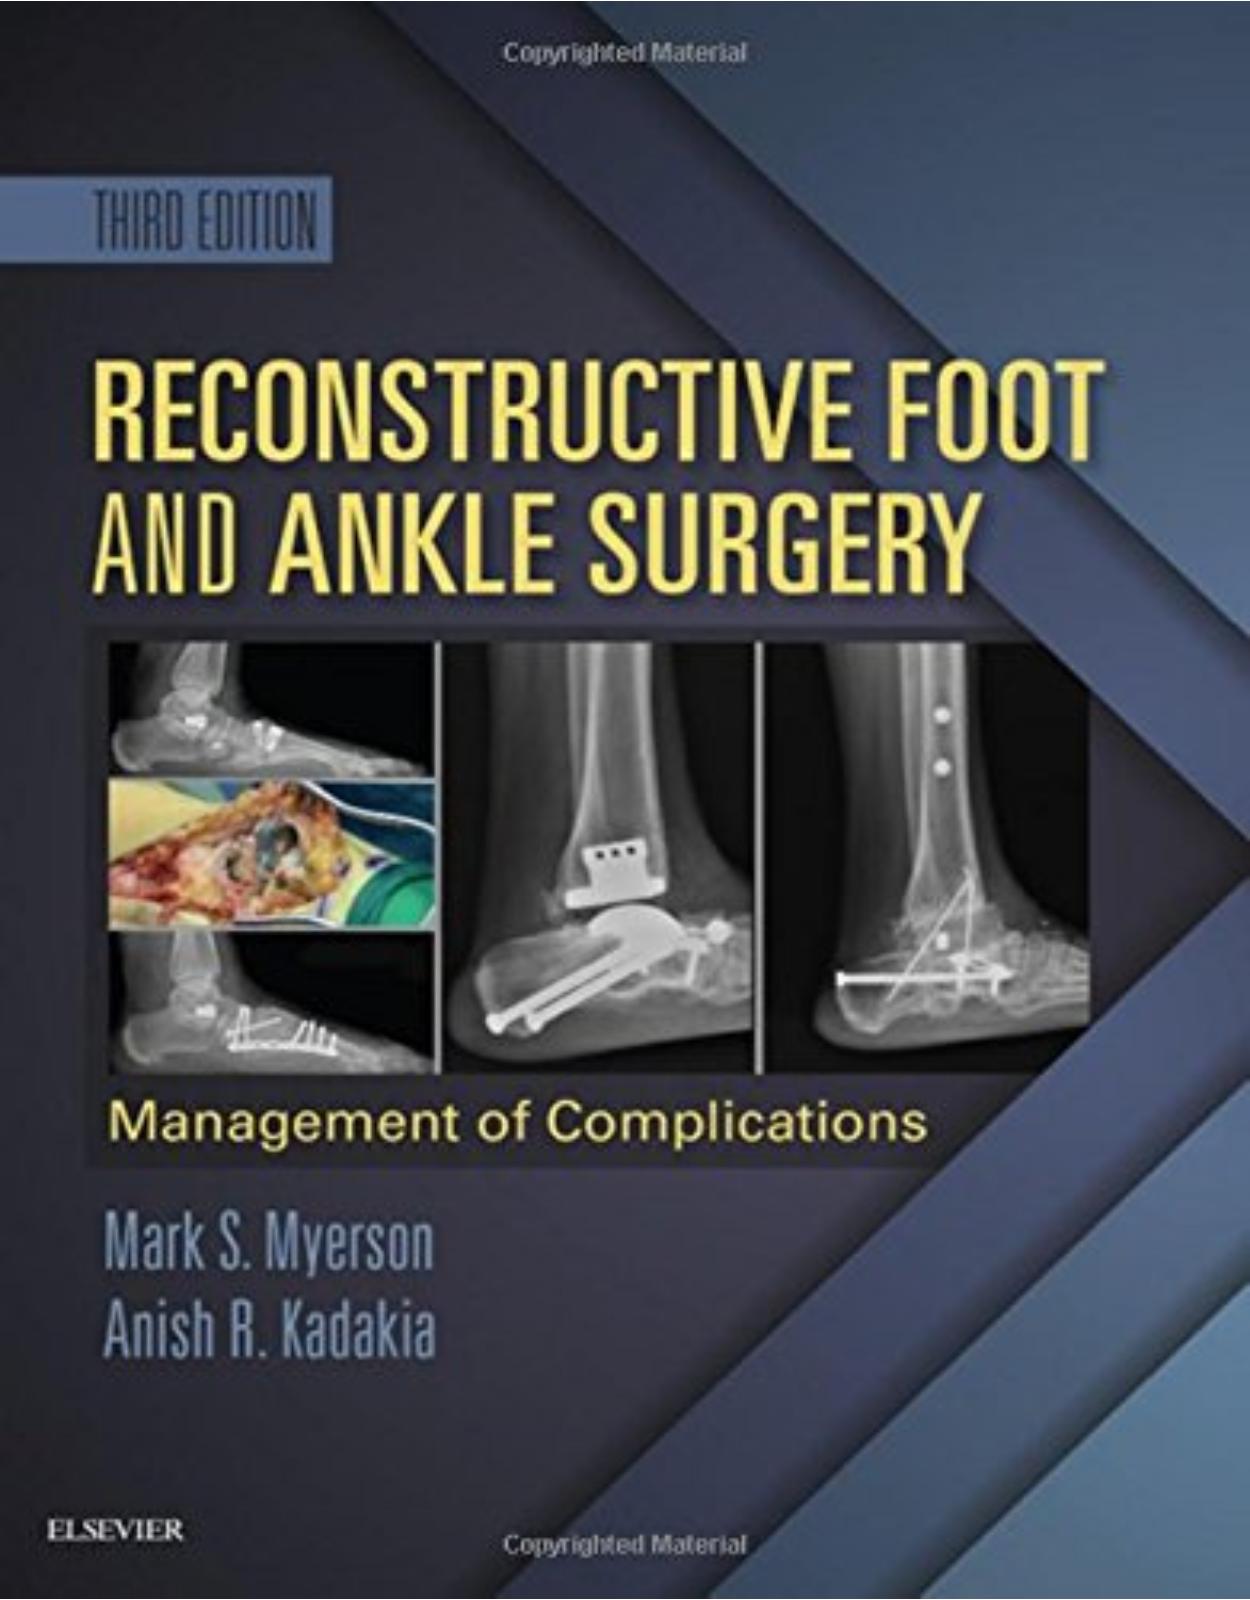 Reconstructive Foot and Ankle Surgery: Management of Complications, 3e